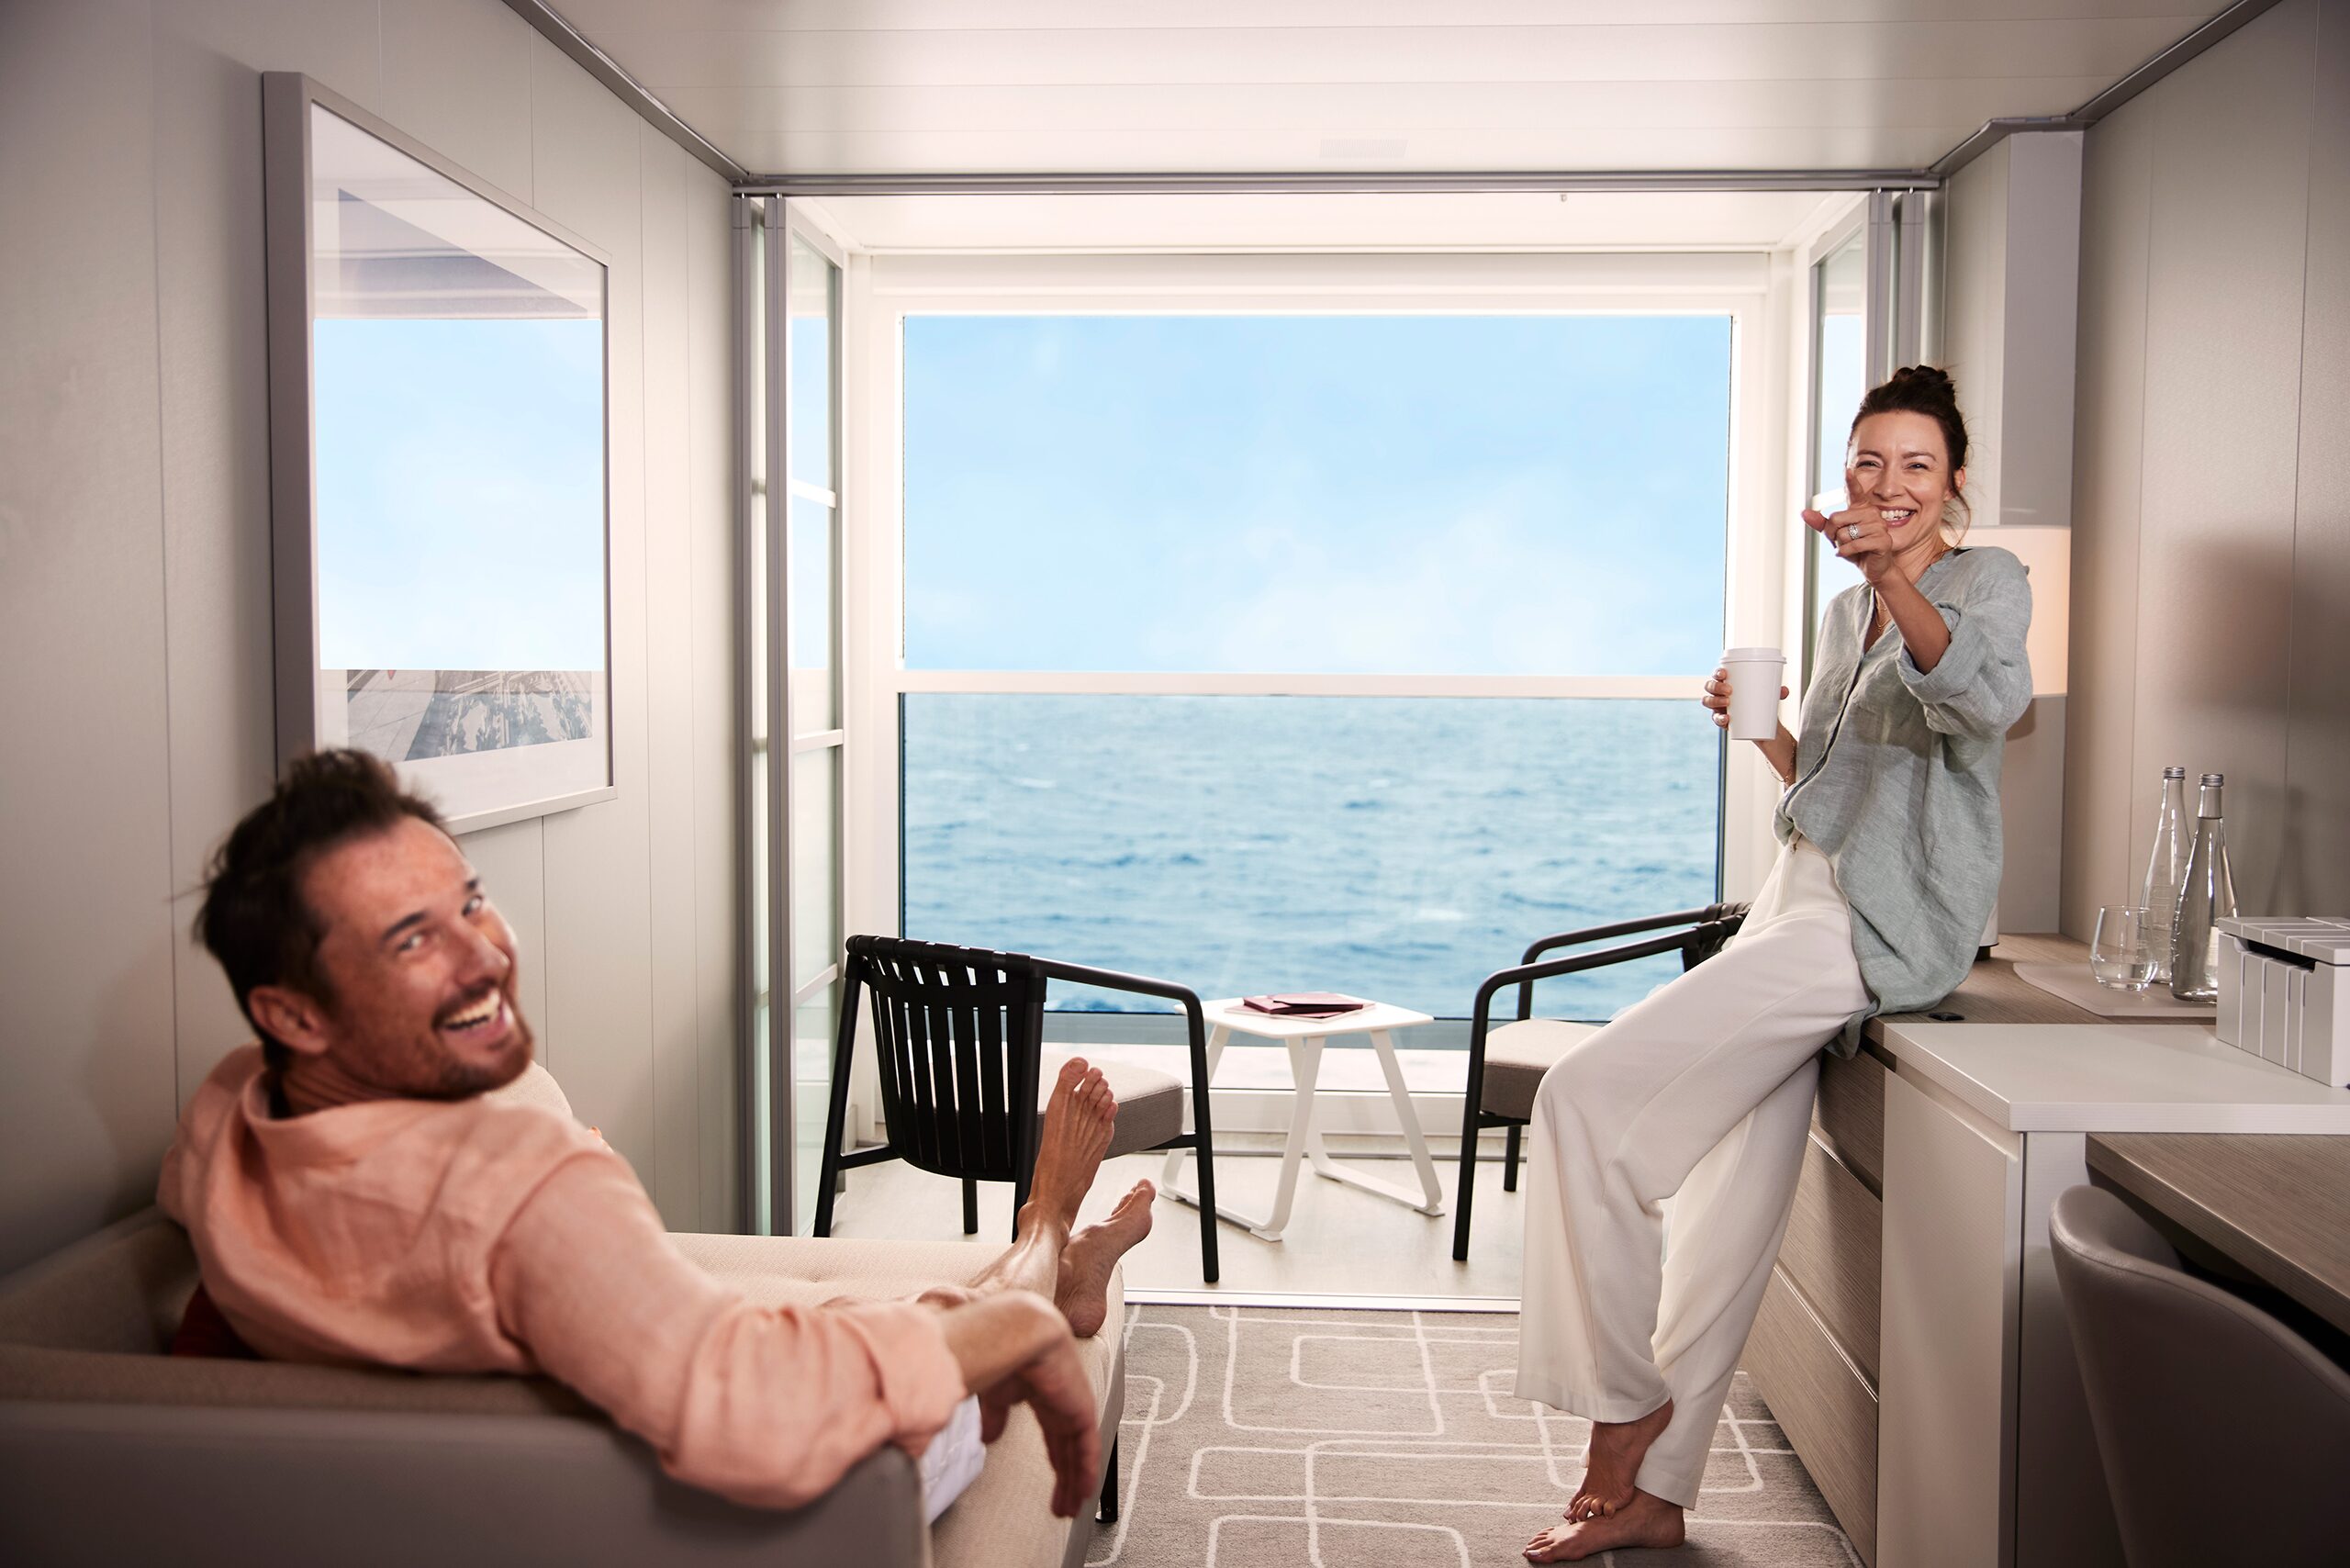 AT LEAST 30% OFF 1ST & 2ND GUEST + ONBOARD SPEND BONUS